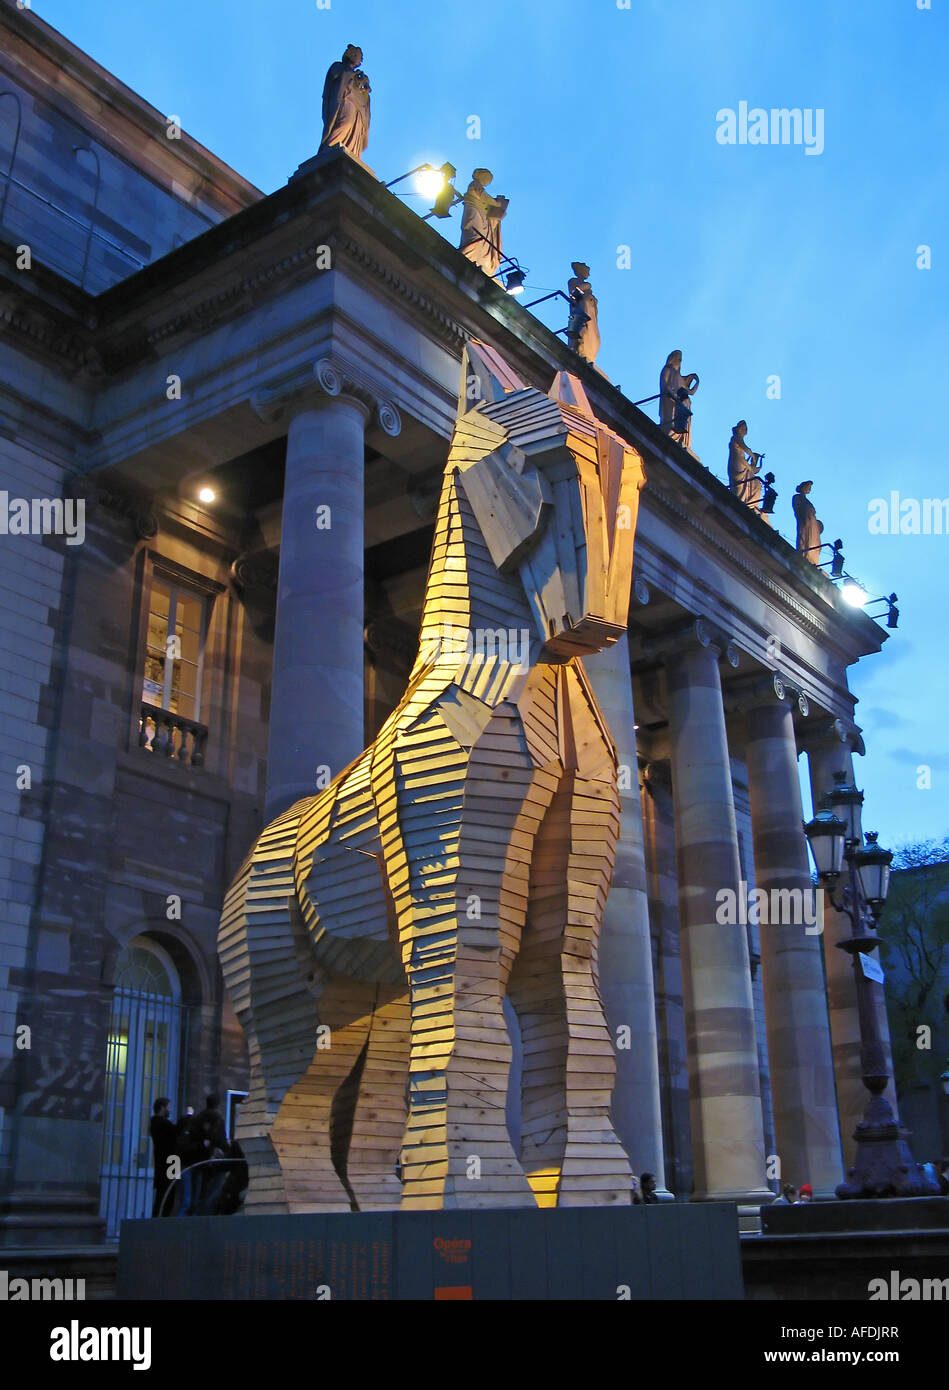 Wooden Trojan horse by Philippe Miesch in front of Opera house at dusk, Strasbourg, Alsace, France Stock Photo